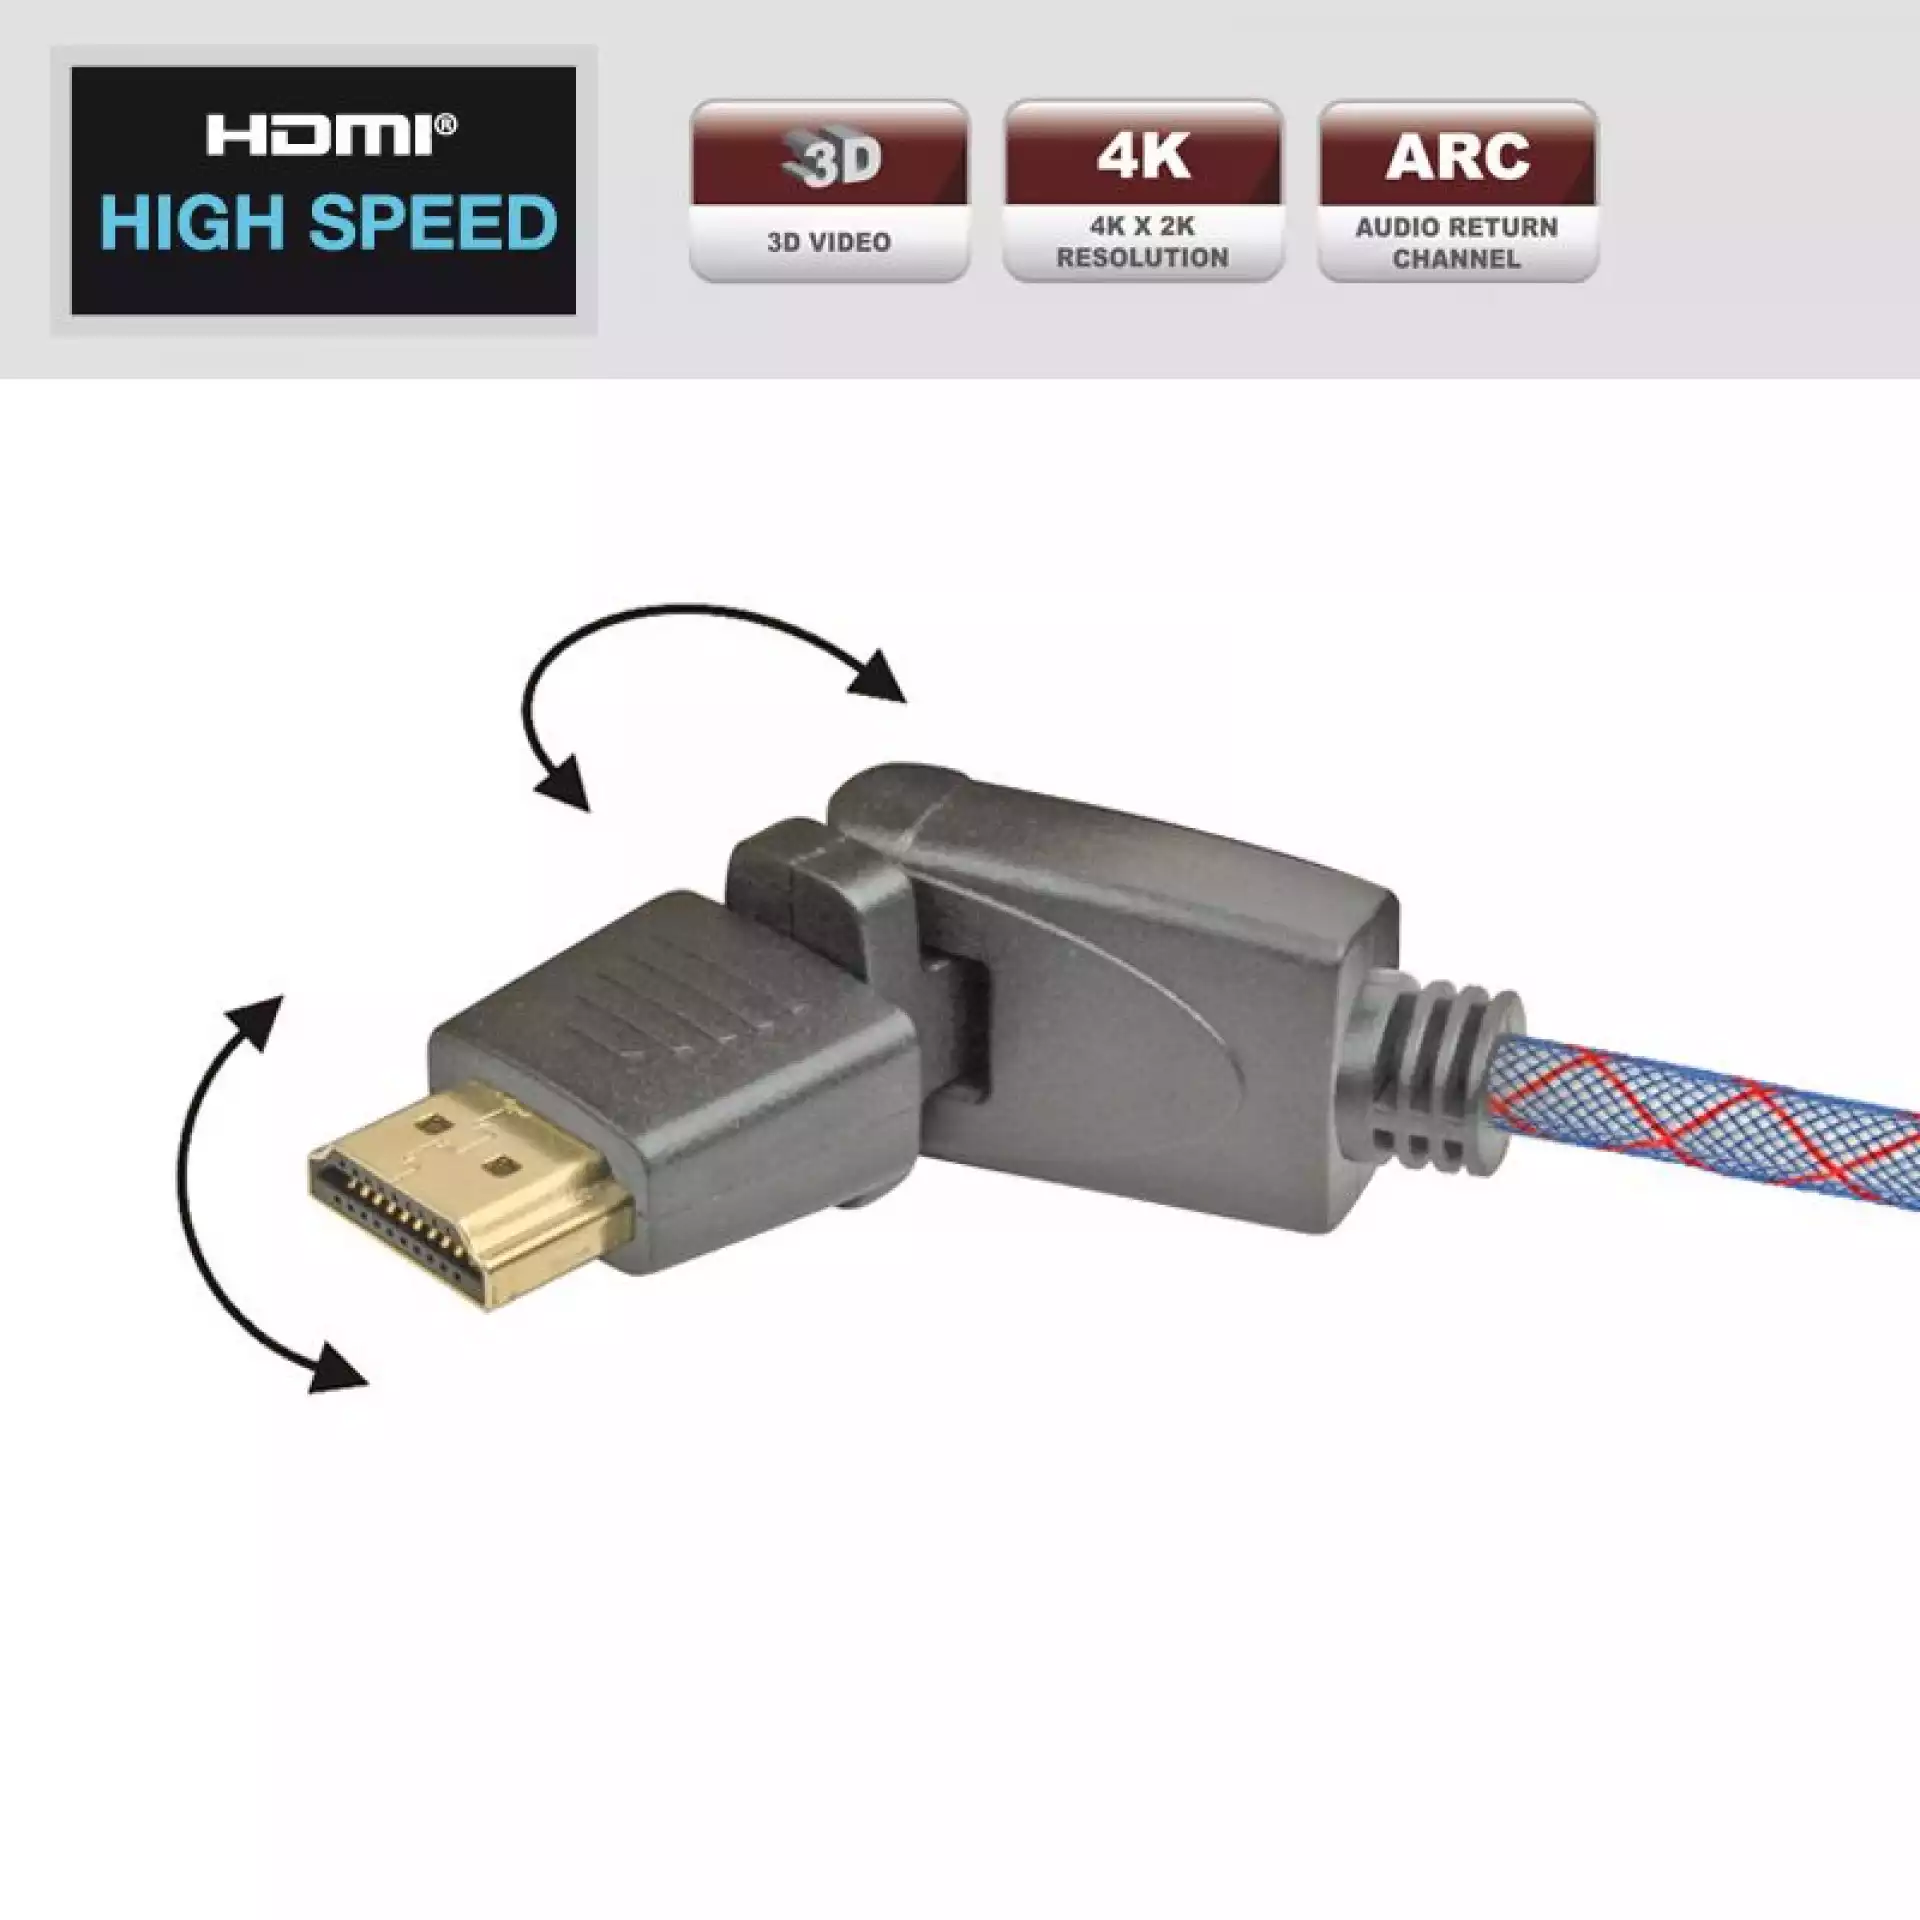 REAL CABLE HD E 360 1m